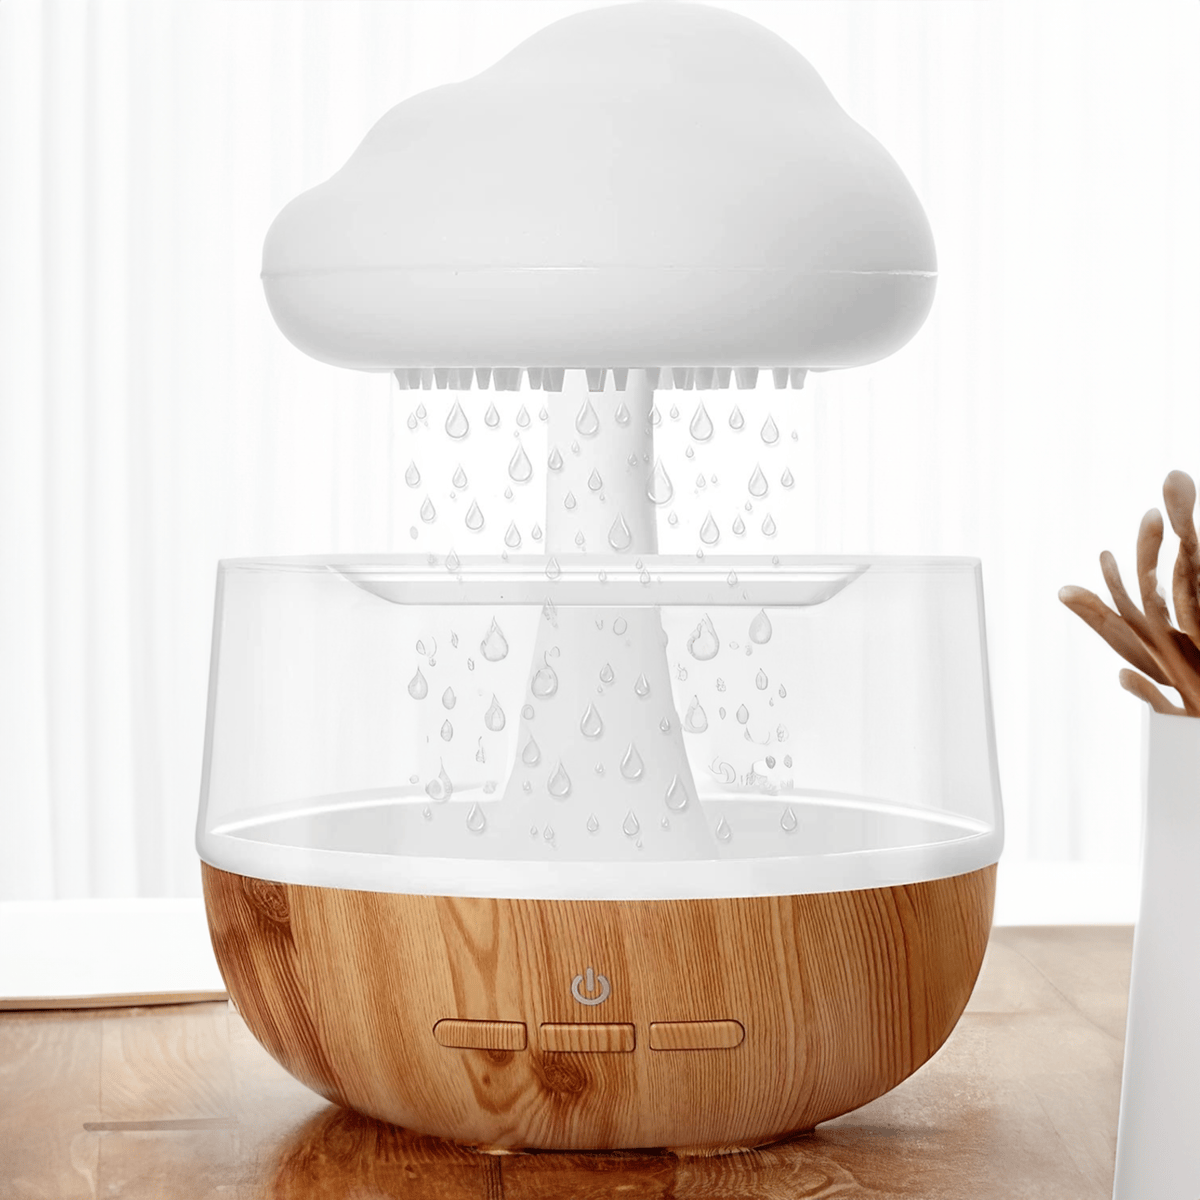 Rain Cloud Humidifier,Aromatherapy Oil Diffuser,Stress Relief,Enhanced Sleep,Modern Design,Hydrate Space,Ambiance Maker,Plug and Play,Powerful Performance,rain cloud humidifier mushroom,rain cloud humidifier diffuser,rain cloud oil diffuser,rain cloud humidifier oil diffuser,rain cloud aromatherapy essential oil diffuser,rain cloud essential oil diffuser,rain cloud humidifier and oil diffuser mushroom